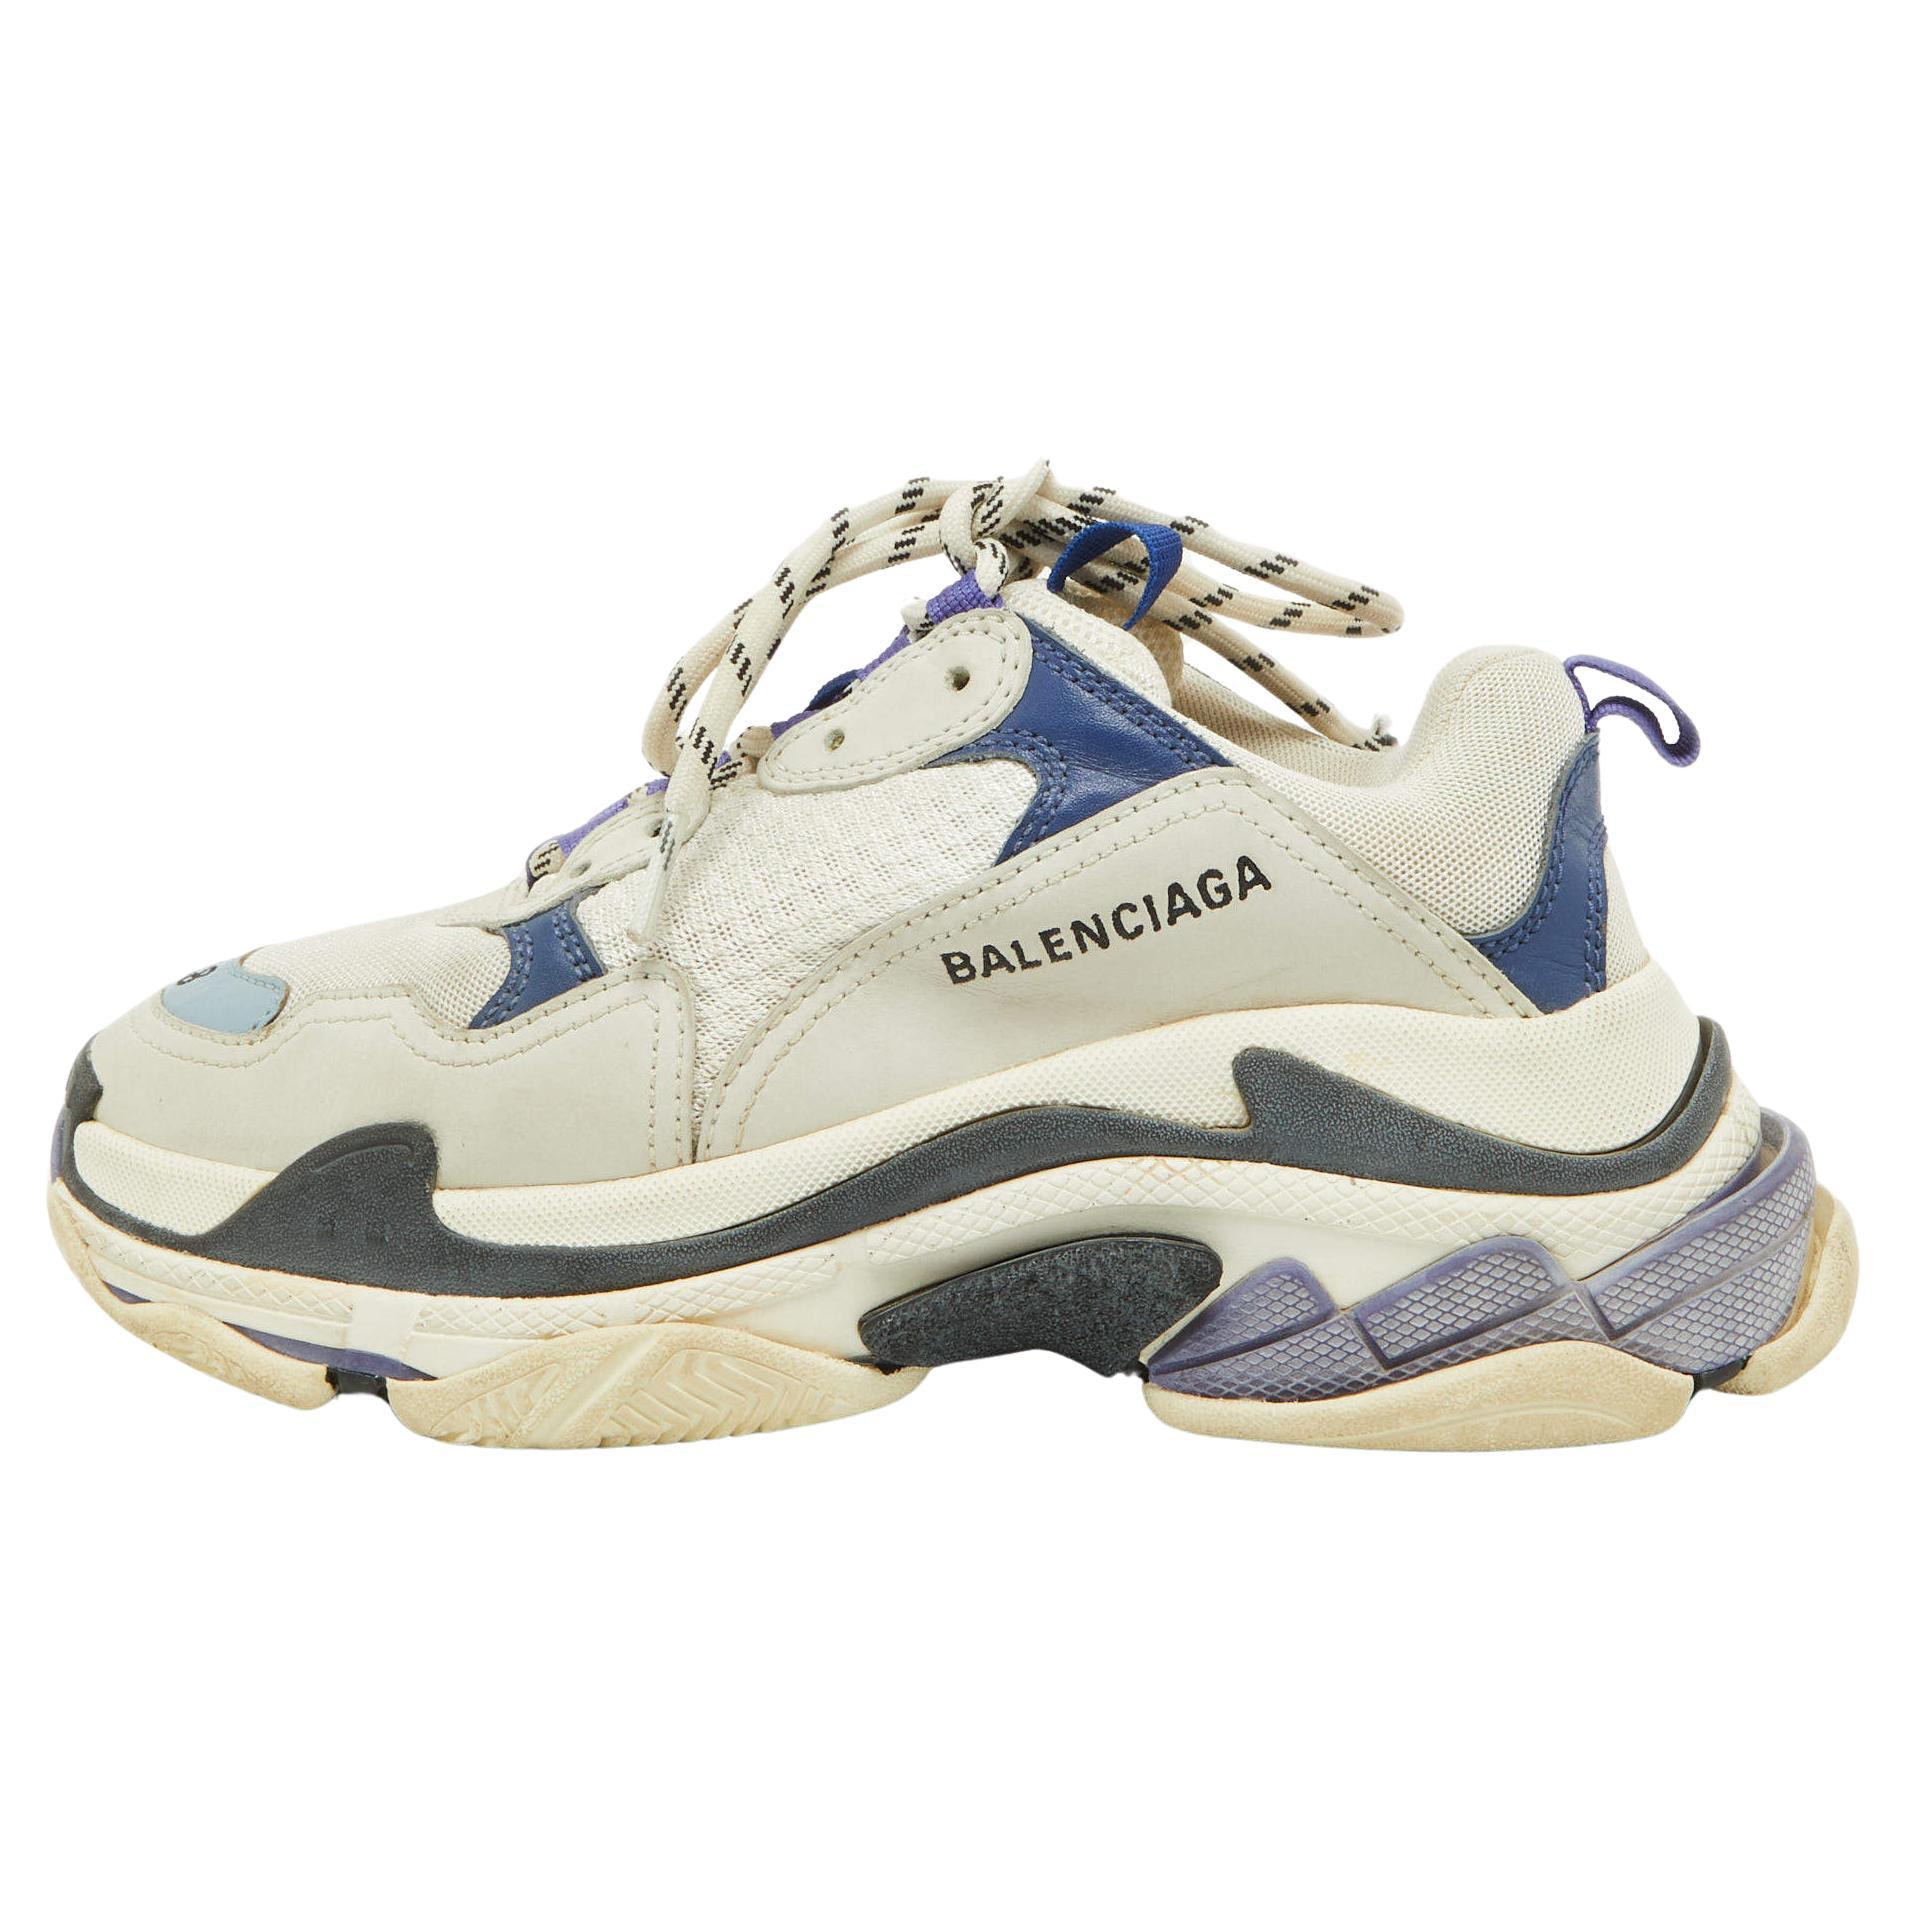 Balenciaga Multicolor Leather and Mesh Triple S Sneakers Size 38 For Sale